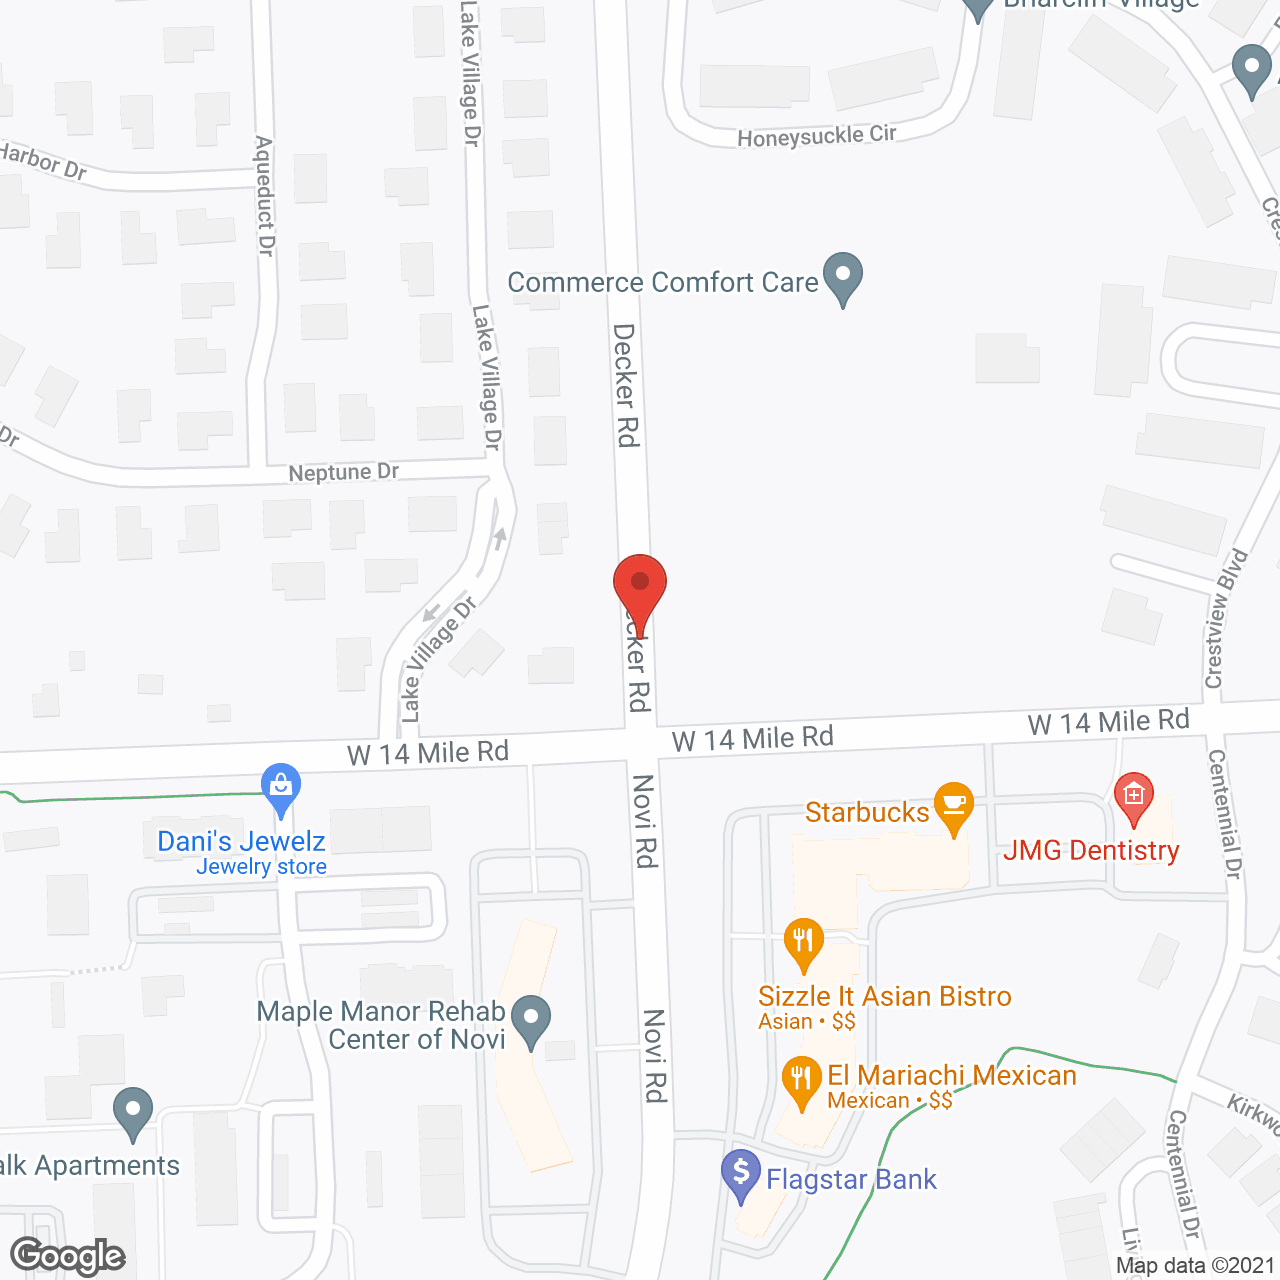 Commerce Comfort Care in google map